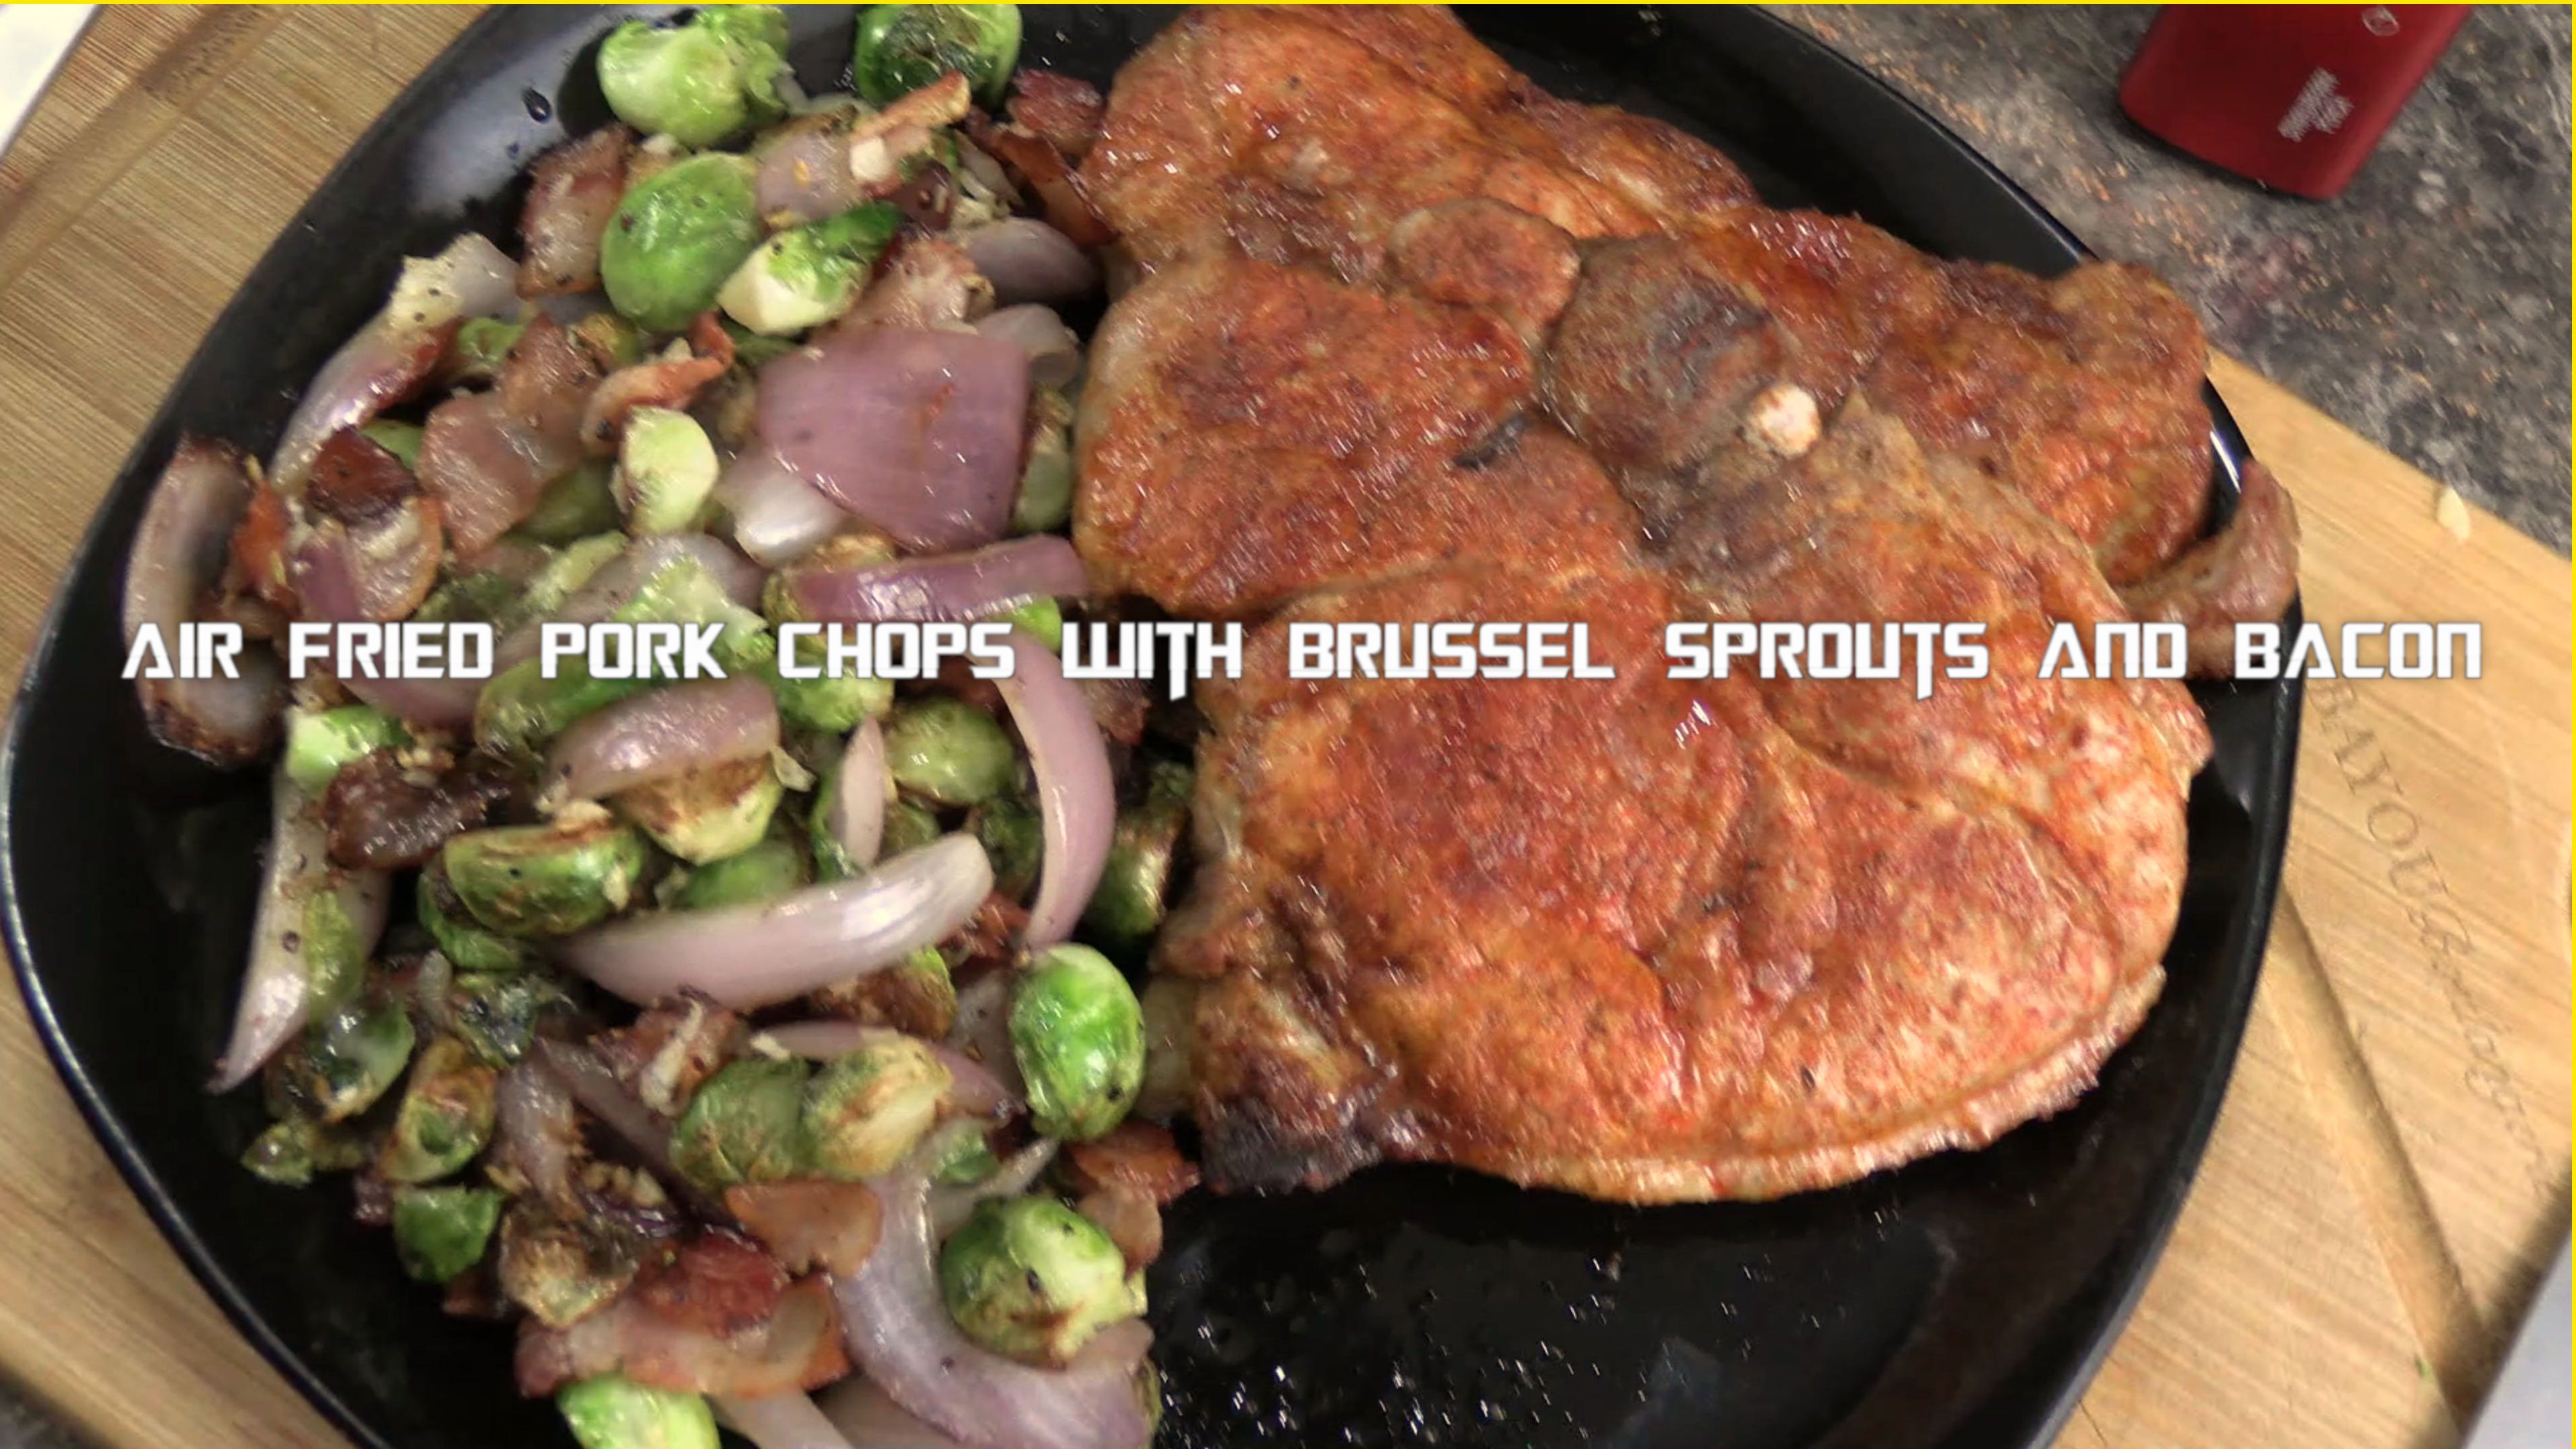 Air Fried Pork Chops With Brussel Sprouts And Bacon